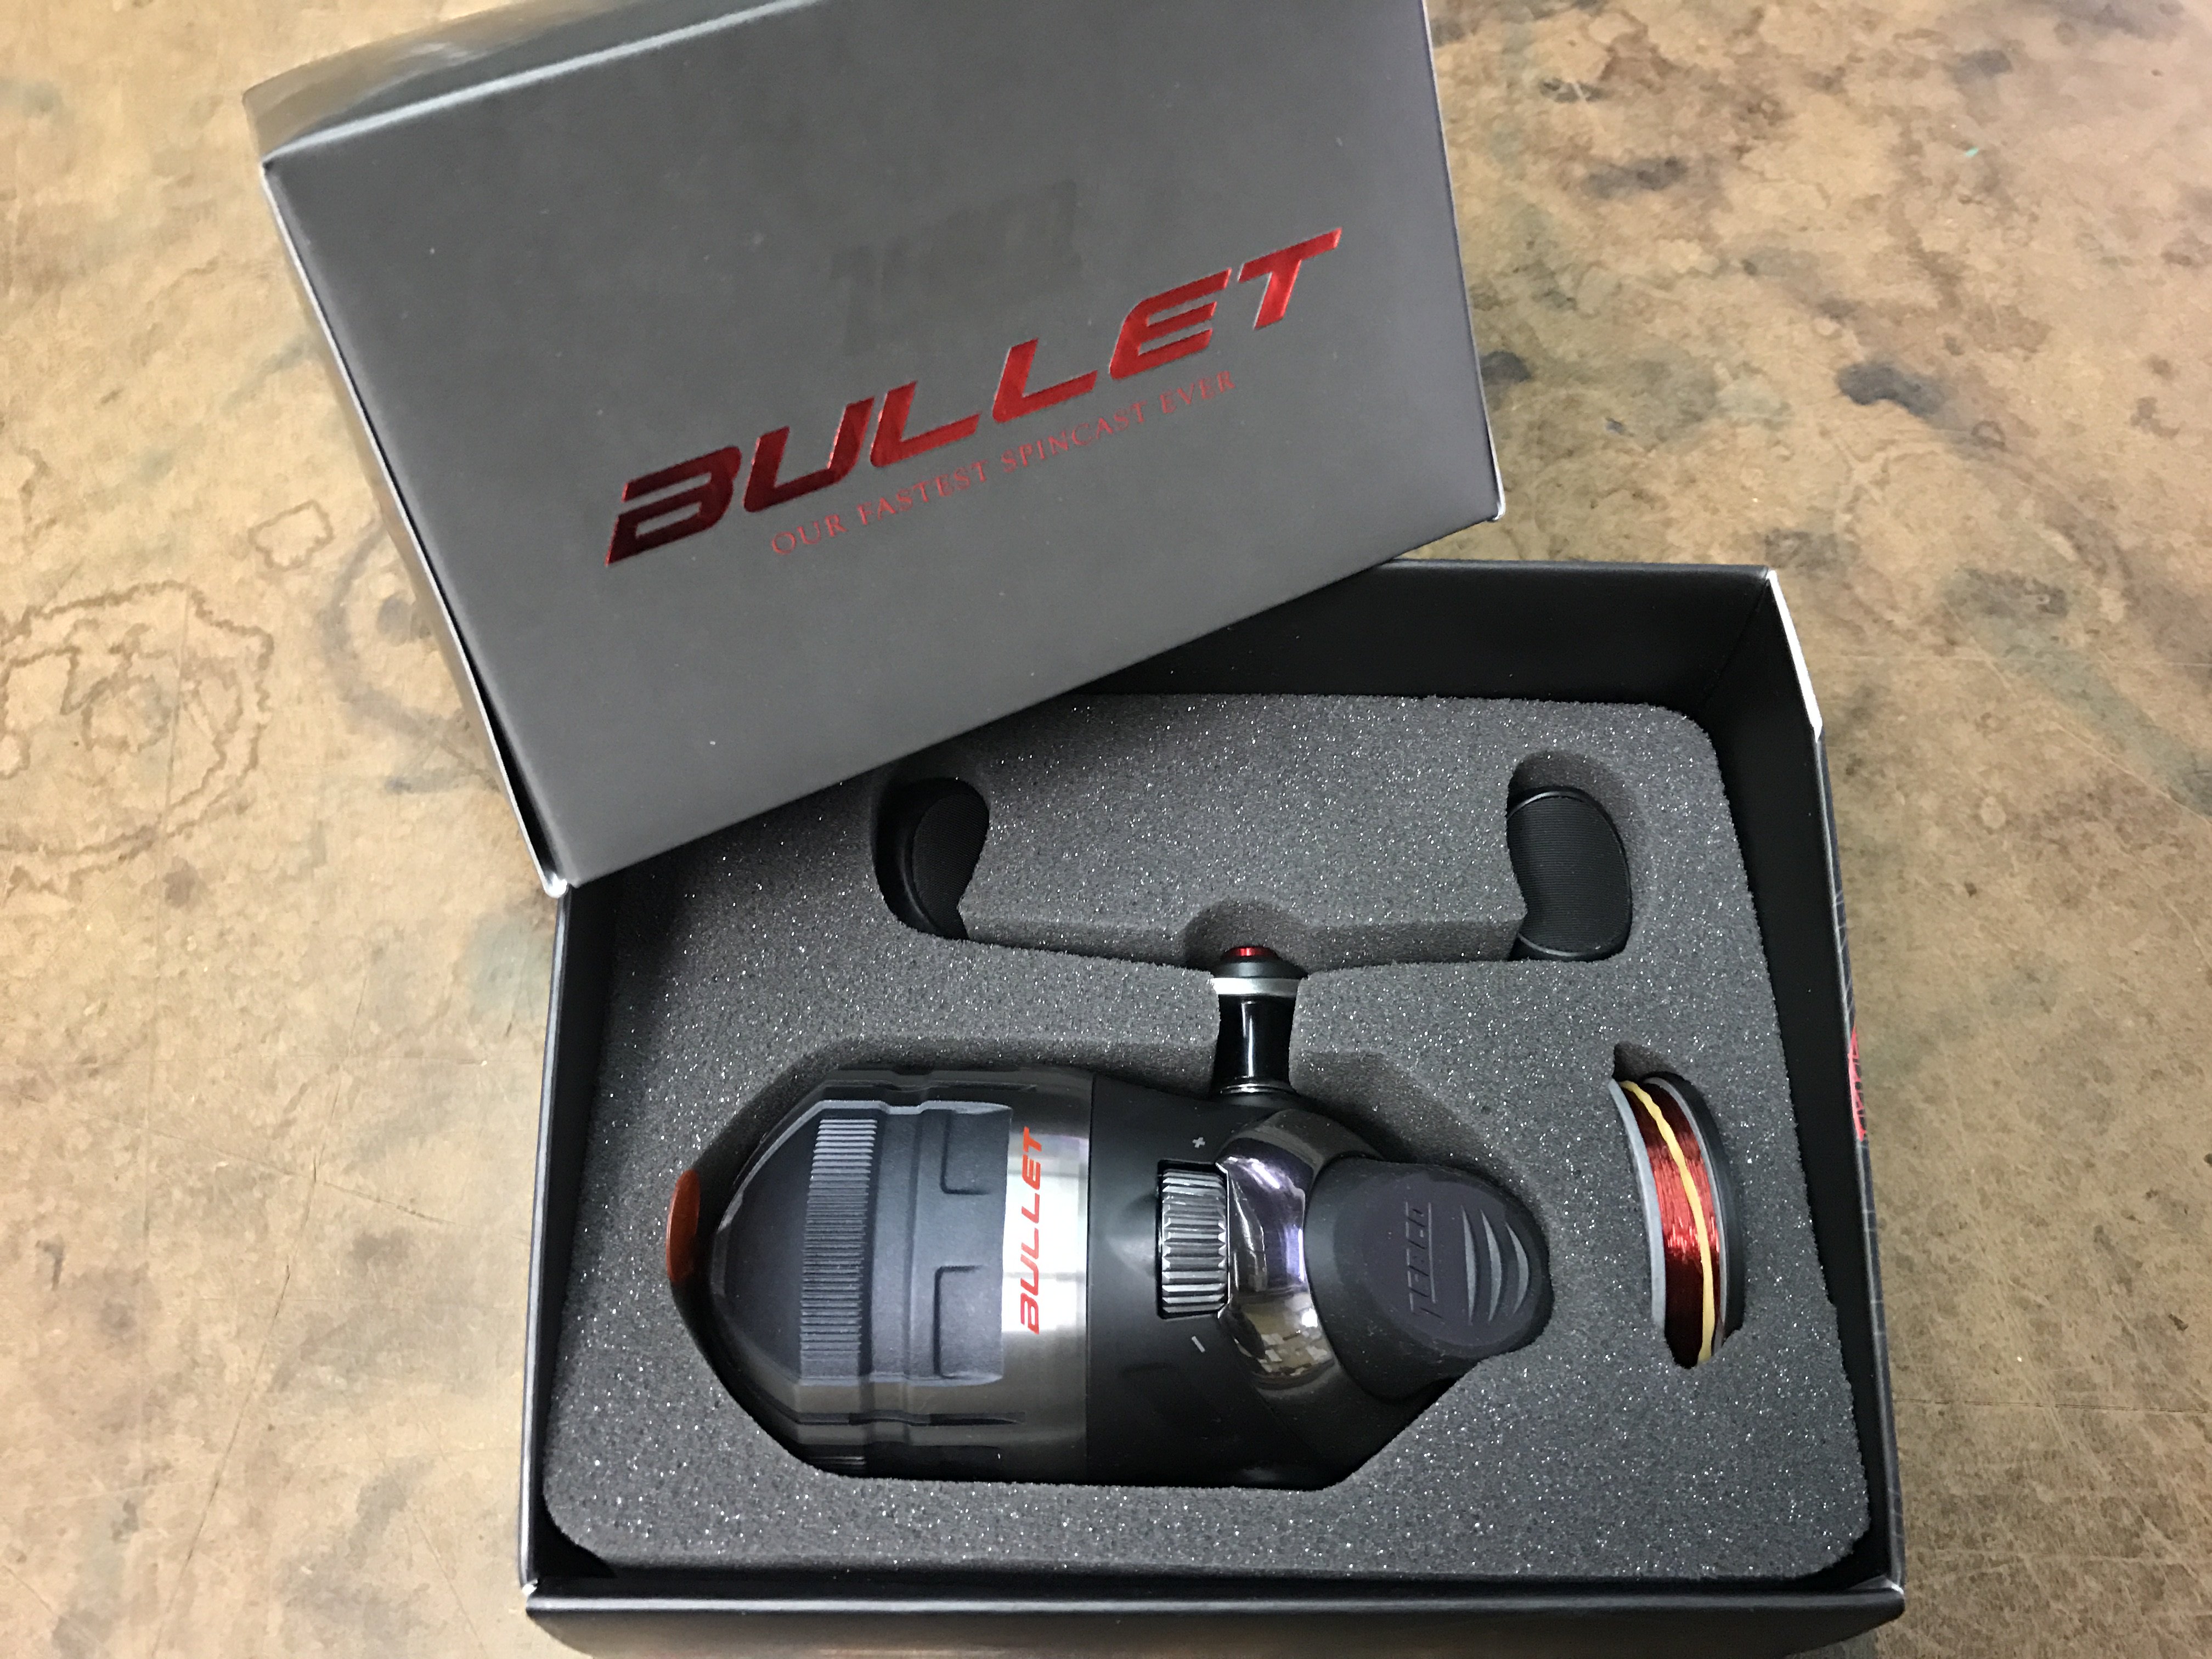 Burch Fishing Tackle on X: Zebco Bullet reels have arrived @BurchFishing!  Visit our site for more information:  or call us:  (256) 764-3183  / X